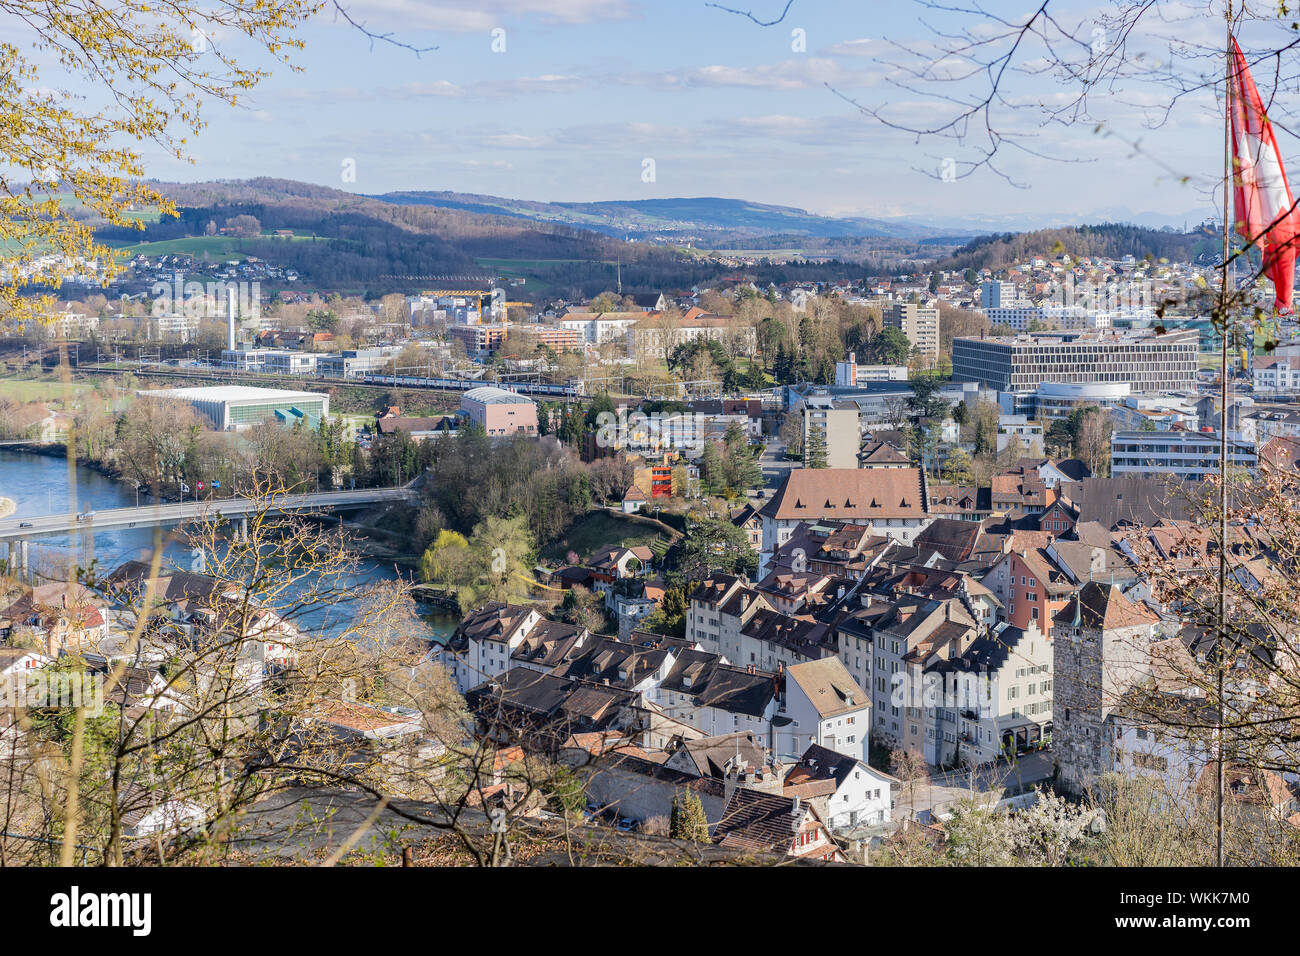 Cityscape of Brugg Ost with residential, commercial districts, historic old town and the casino bridge for vehicles. Stock Photo